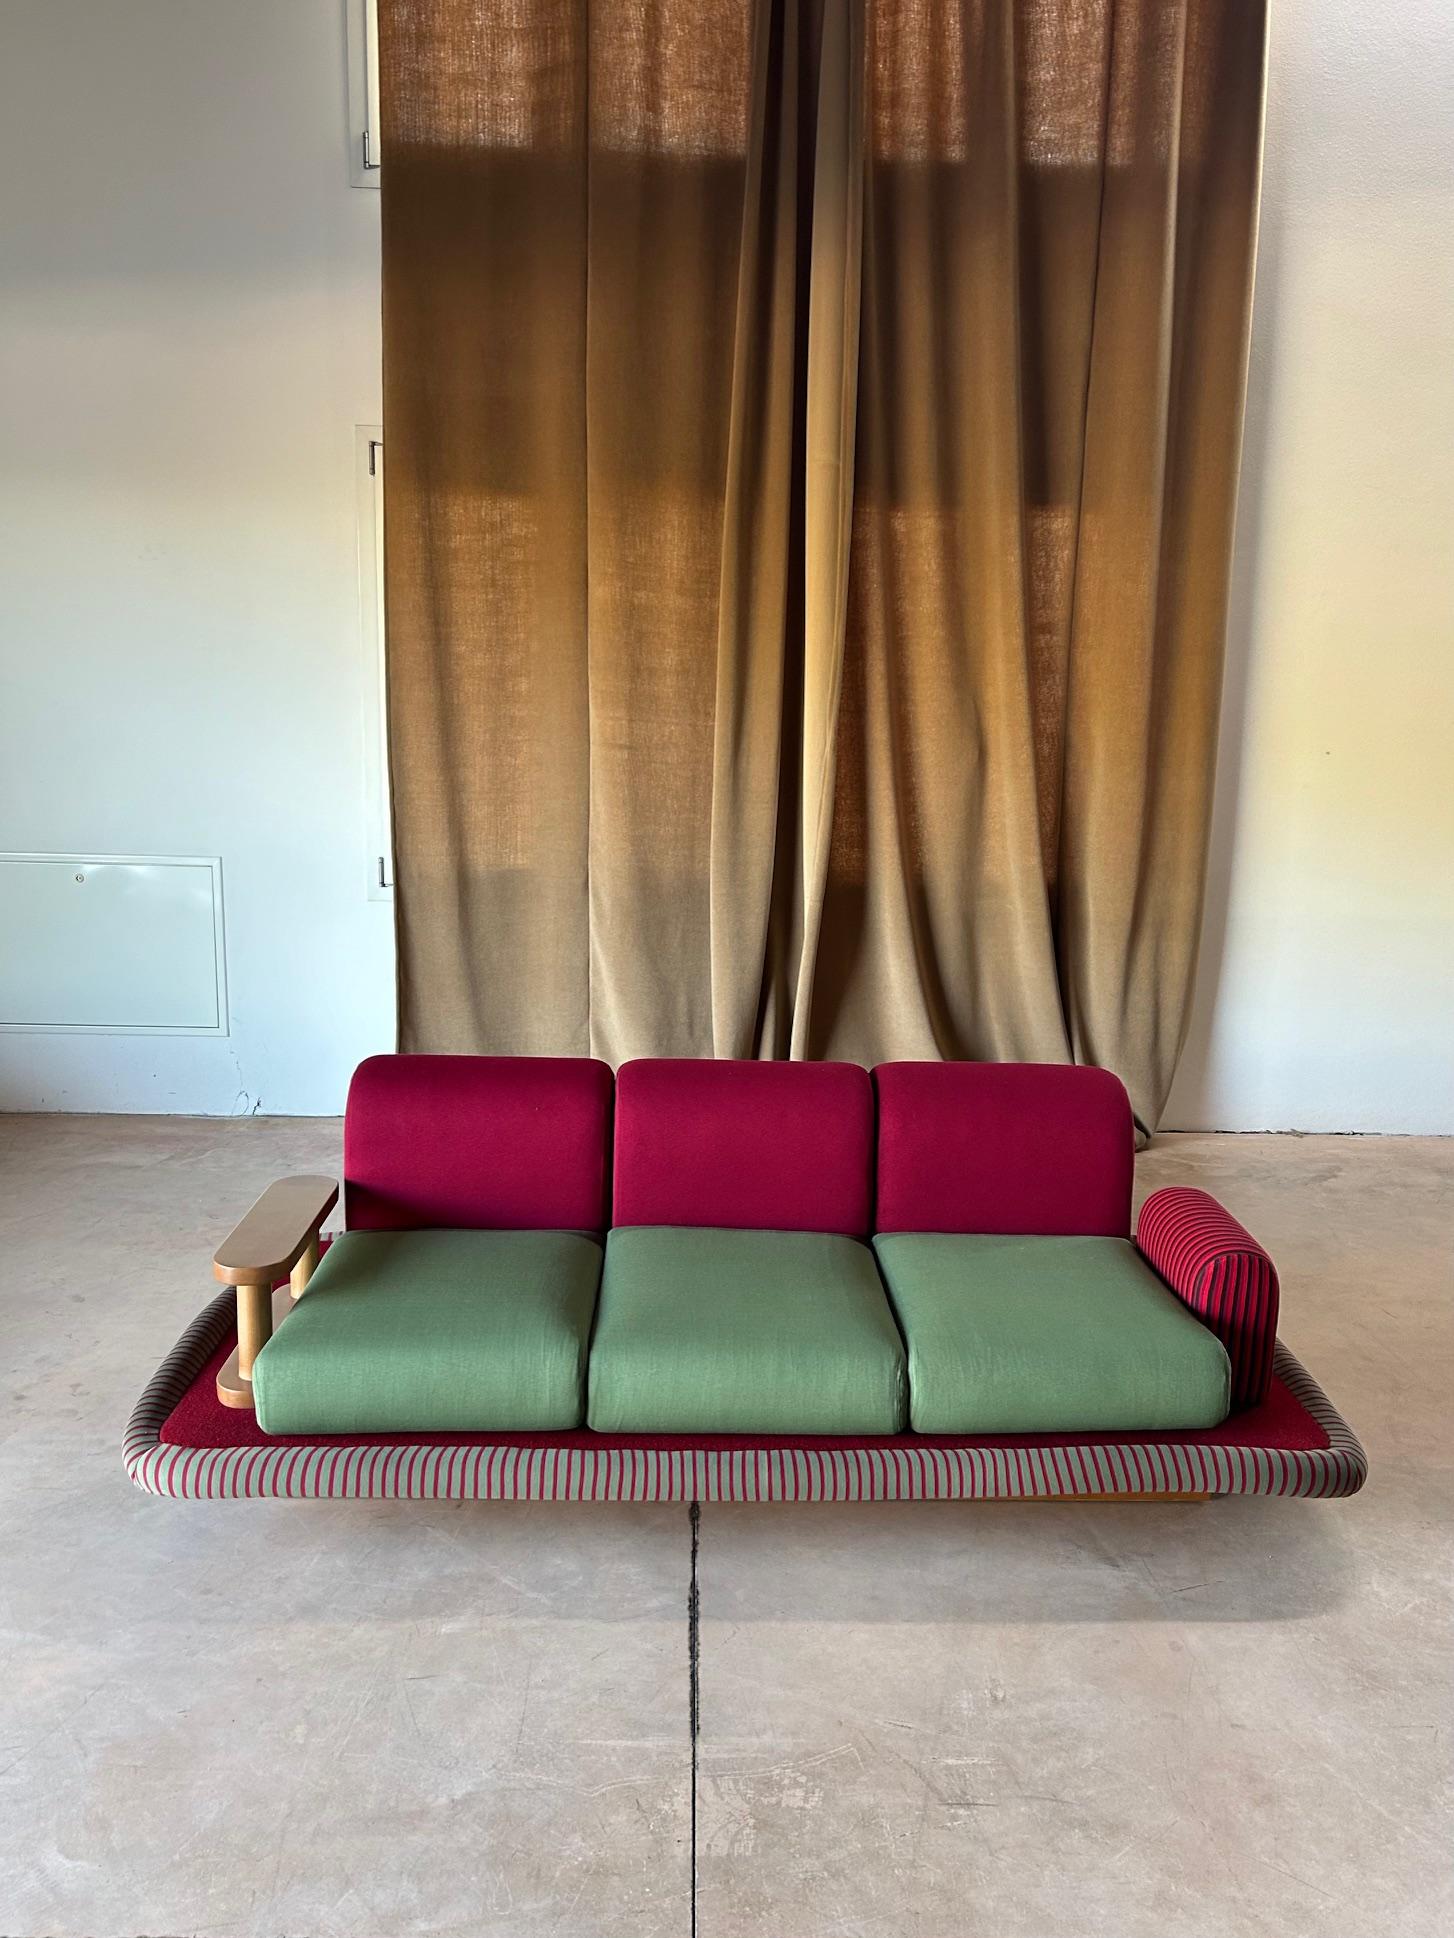 Ettore Sottsass designed this sofa after having known the Indian culture.
A crucial journey in his formation is that of 1961 in India, undertaken with Fernanda Pivano. On this journey Sottsass discovers how Indian culture is strongly based on